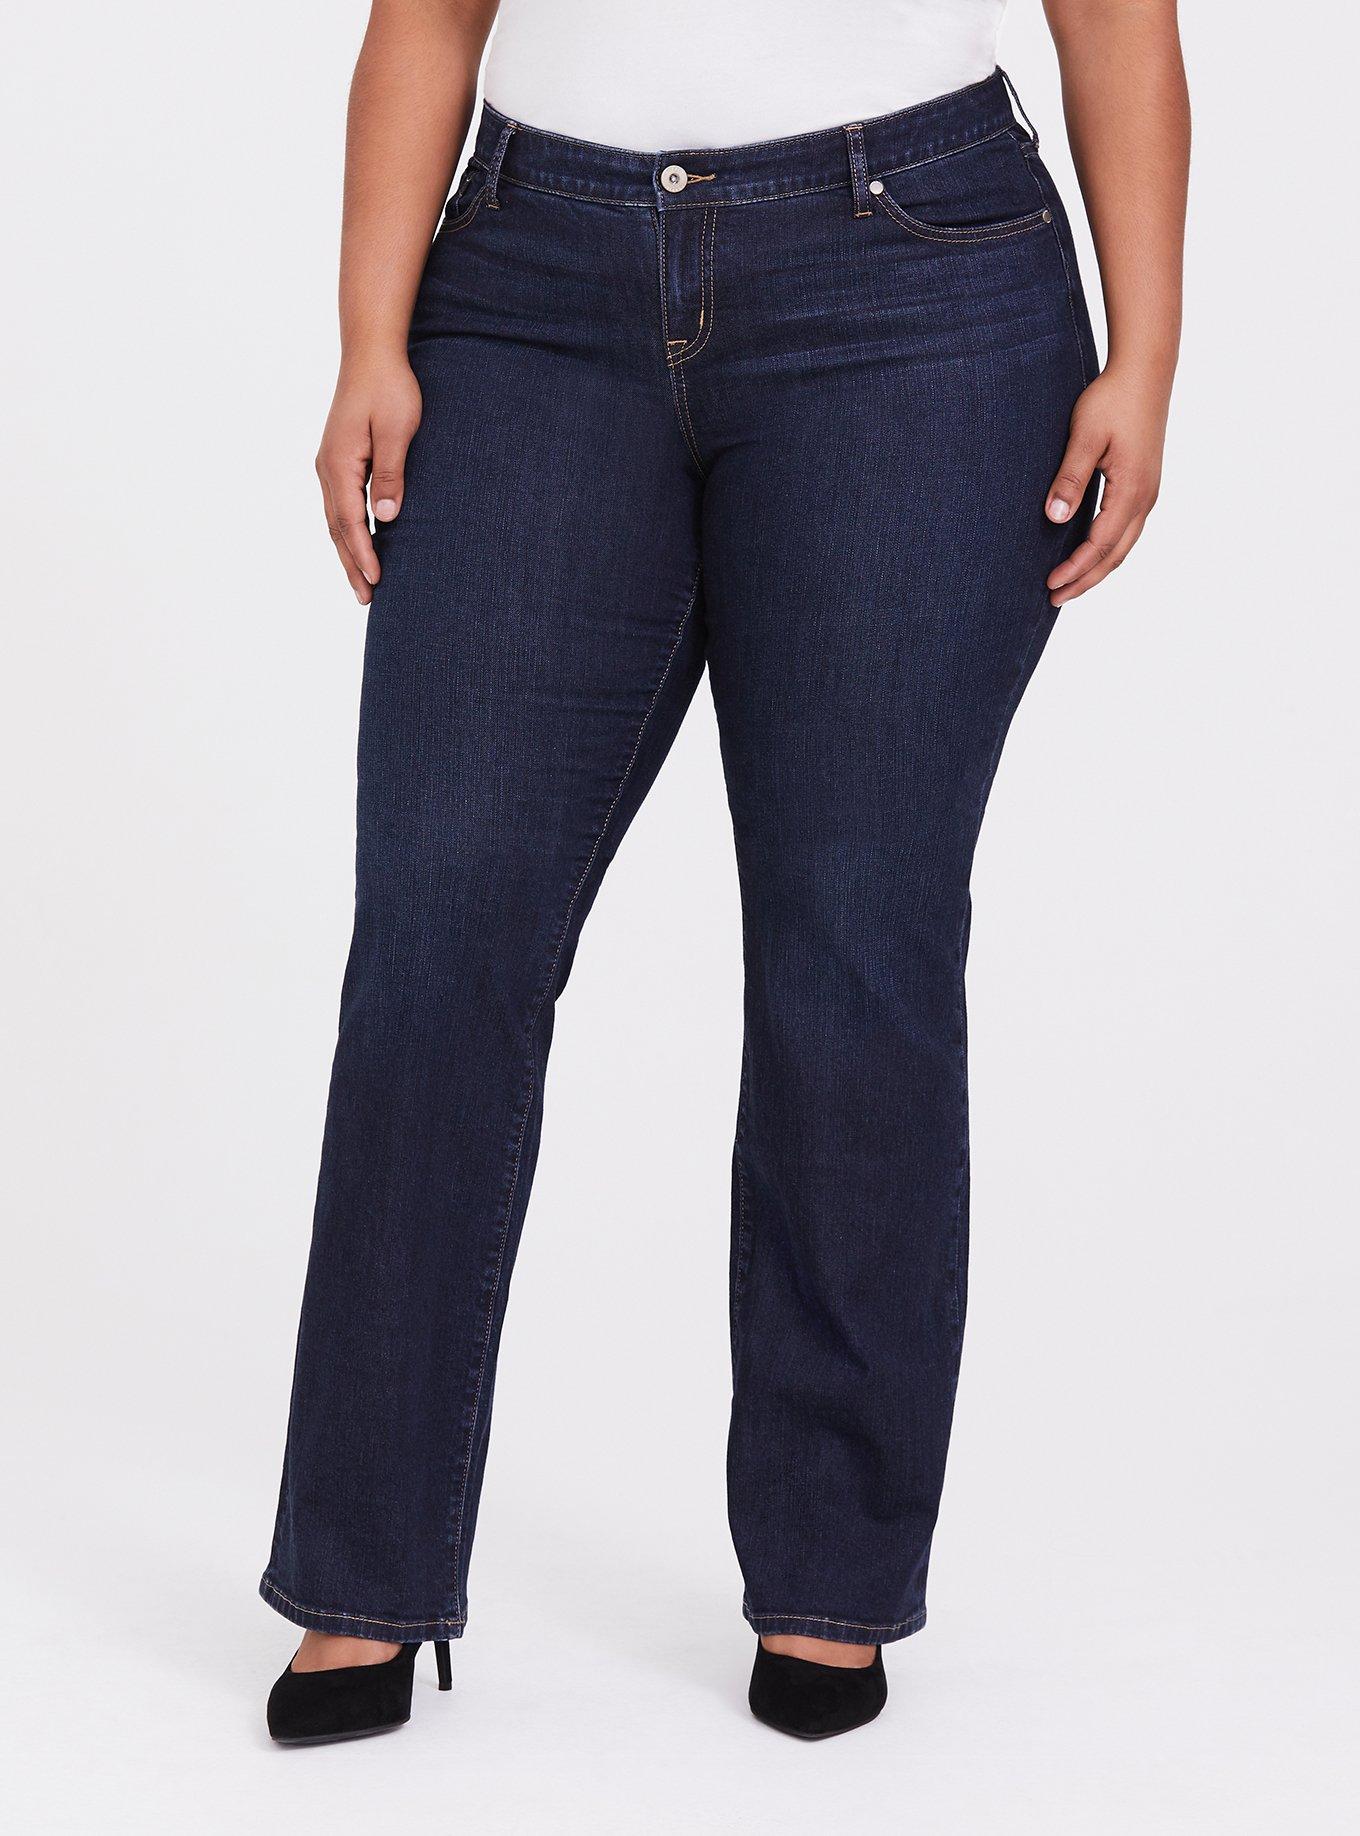 Plus Size - Relaxed Boot Jean - Vintage Stretch Dark Wash - Torrid